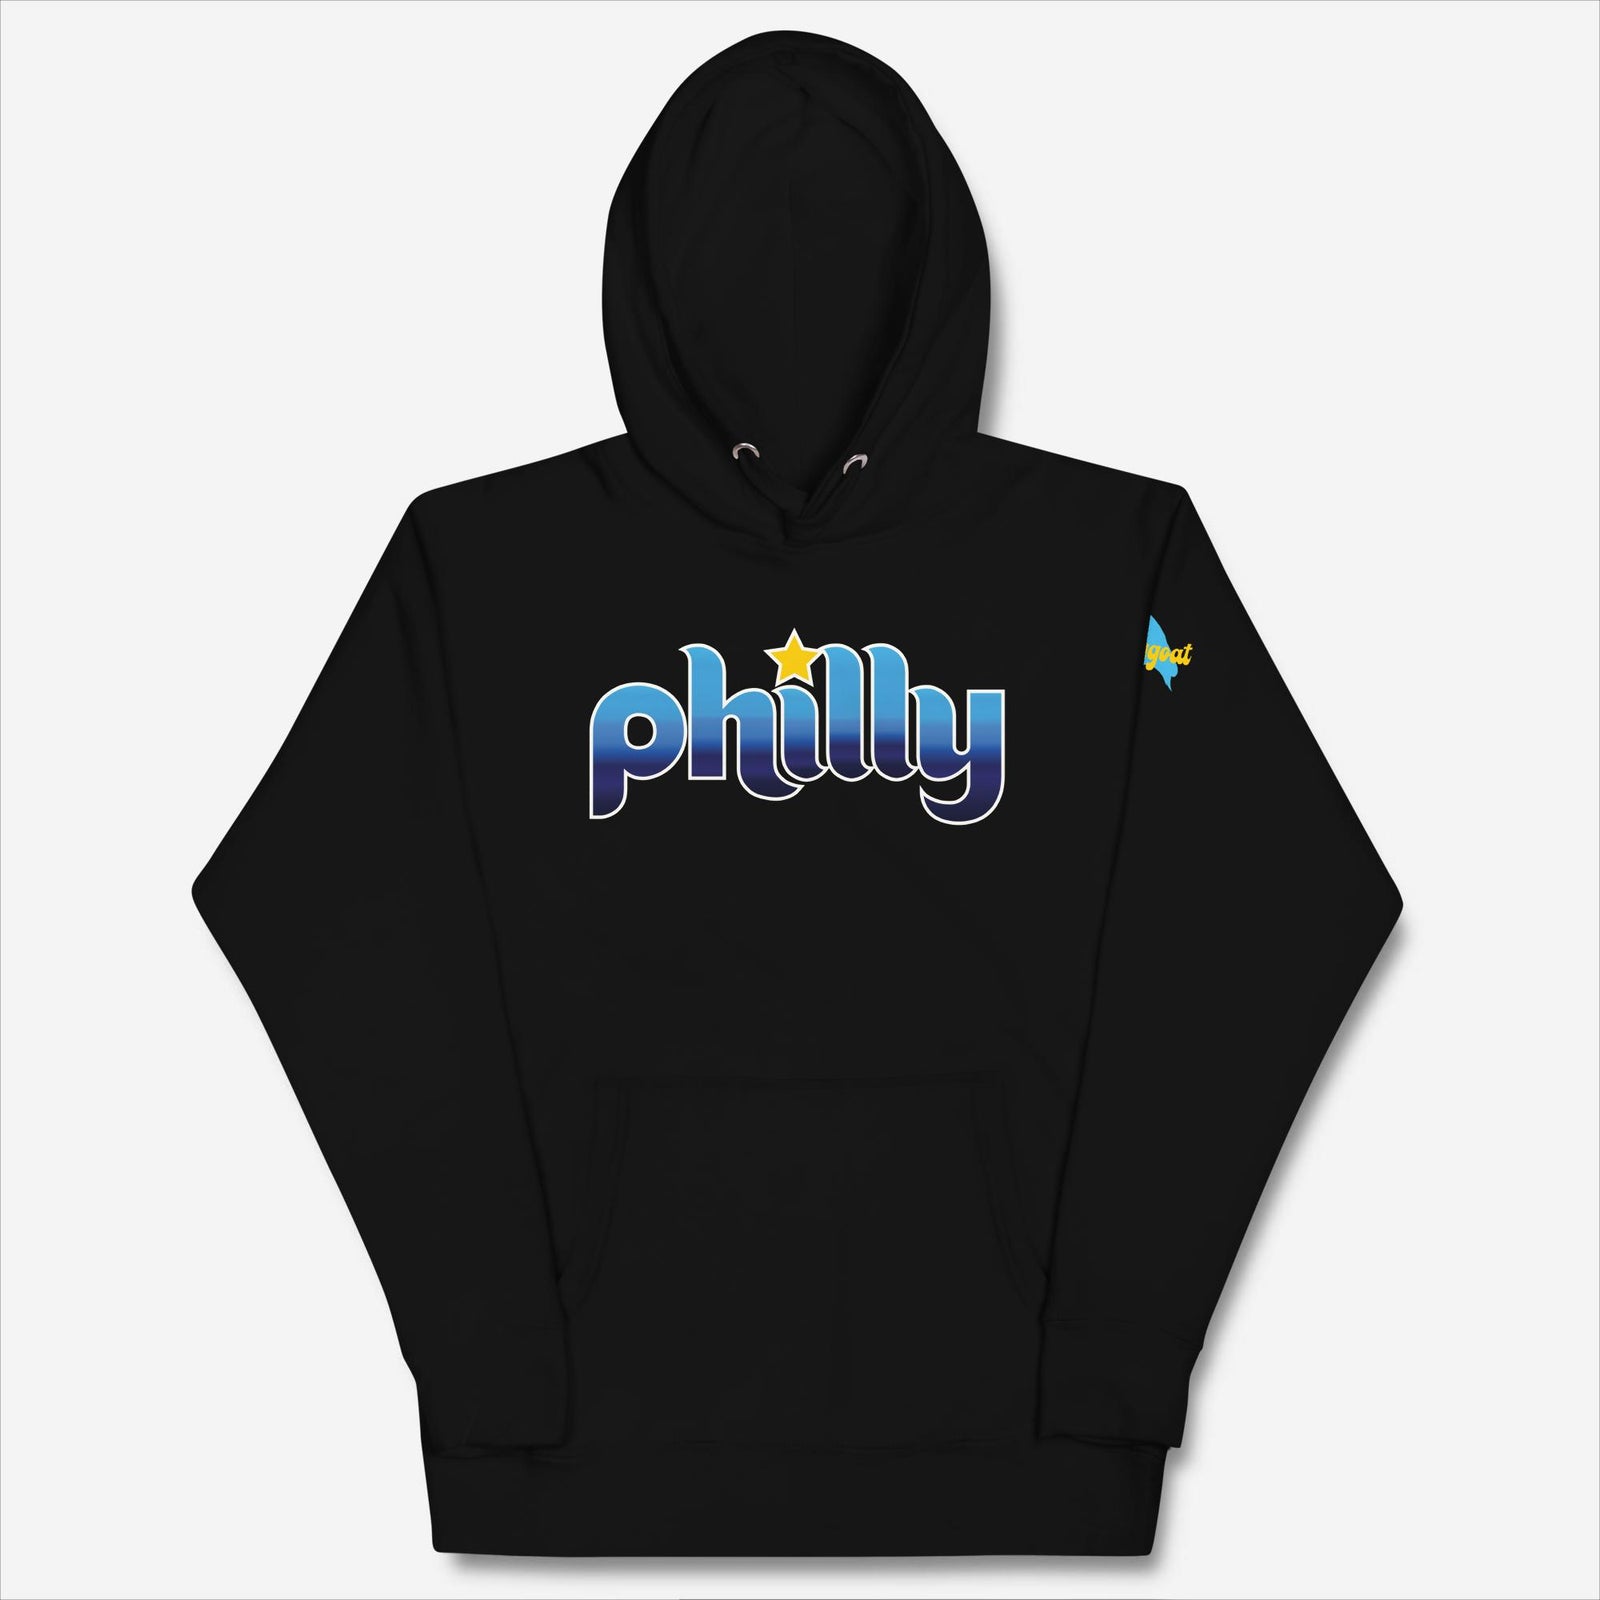 "Philly Connect" Hoodie